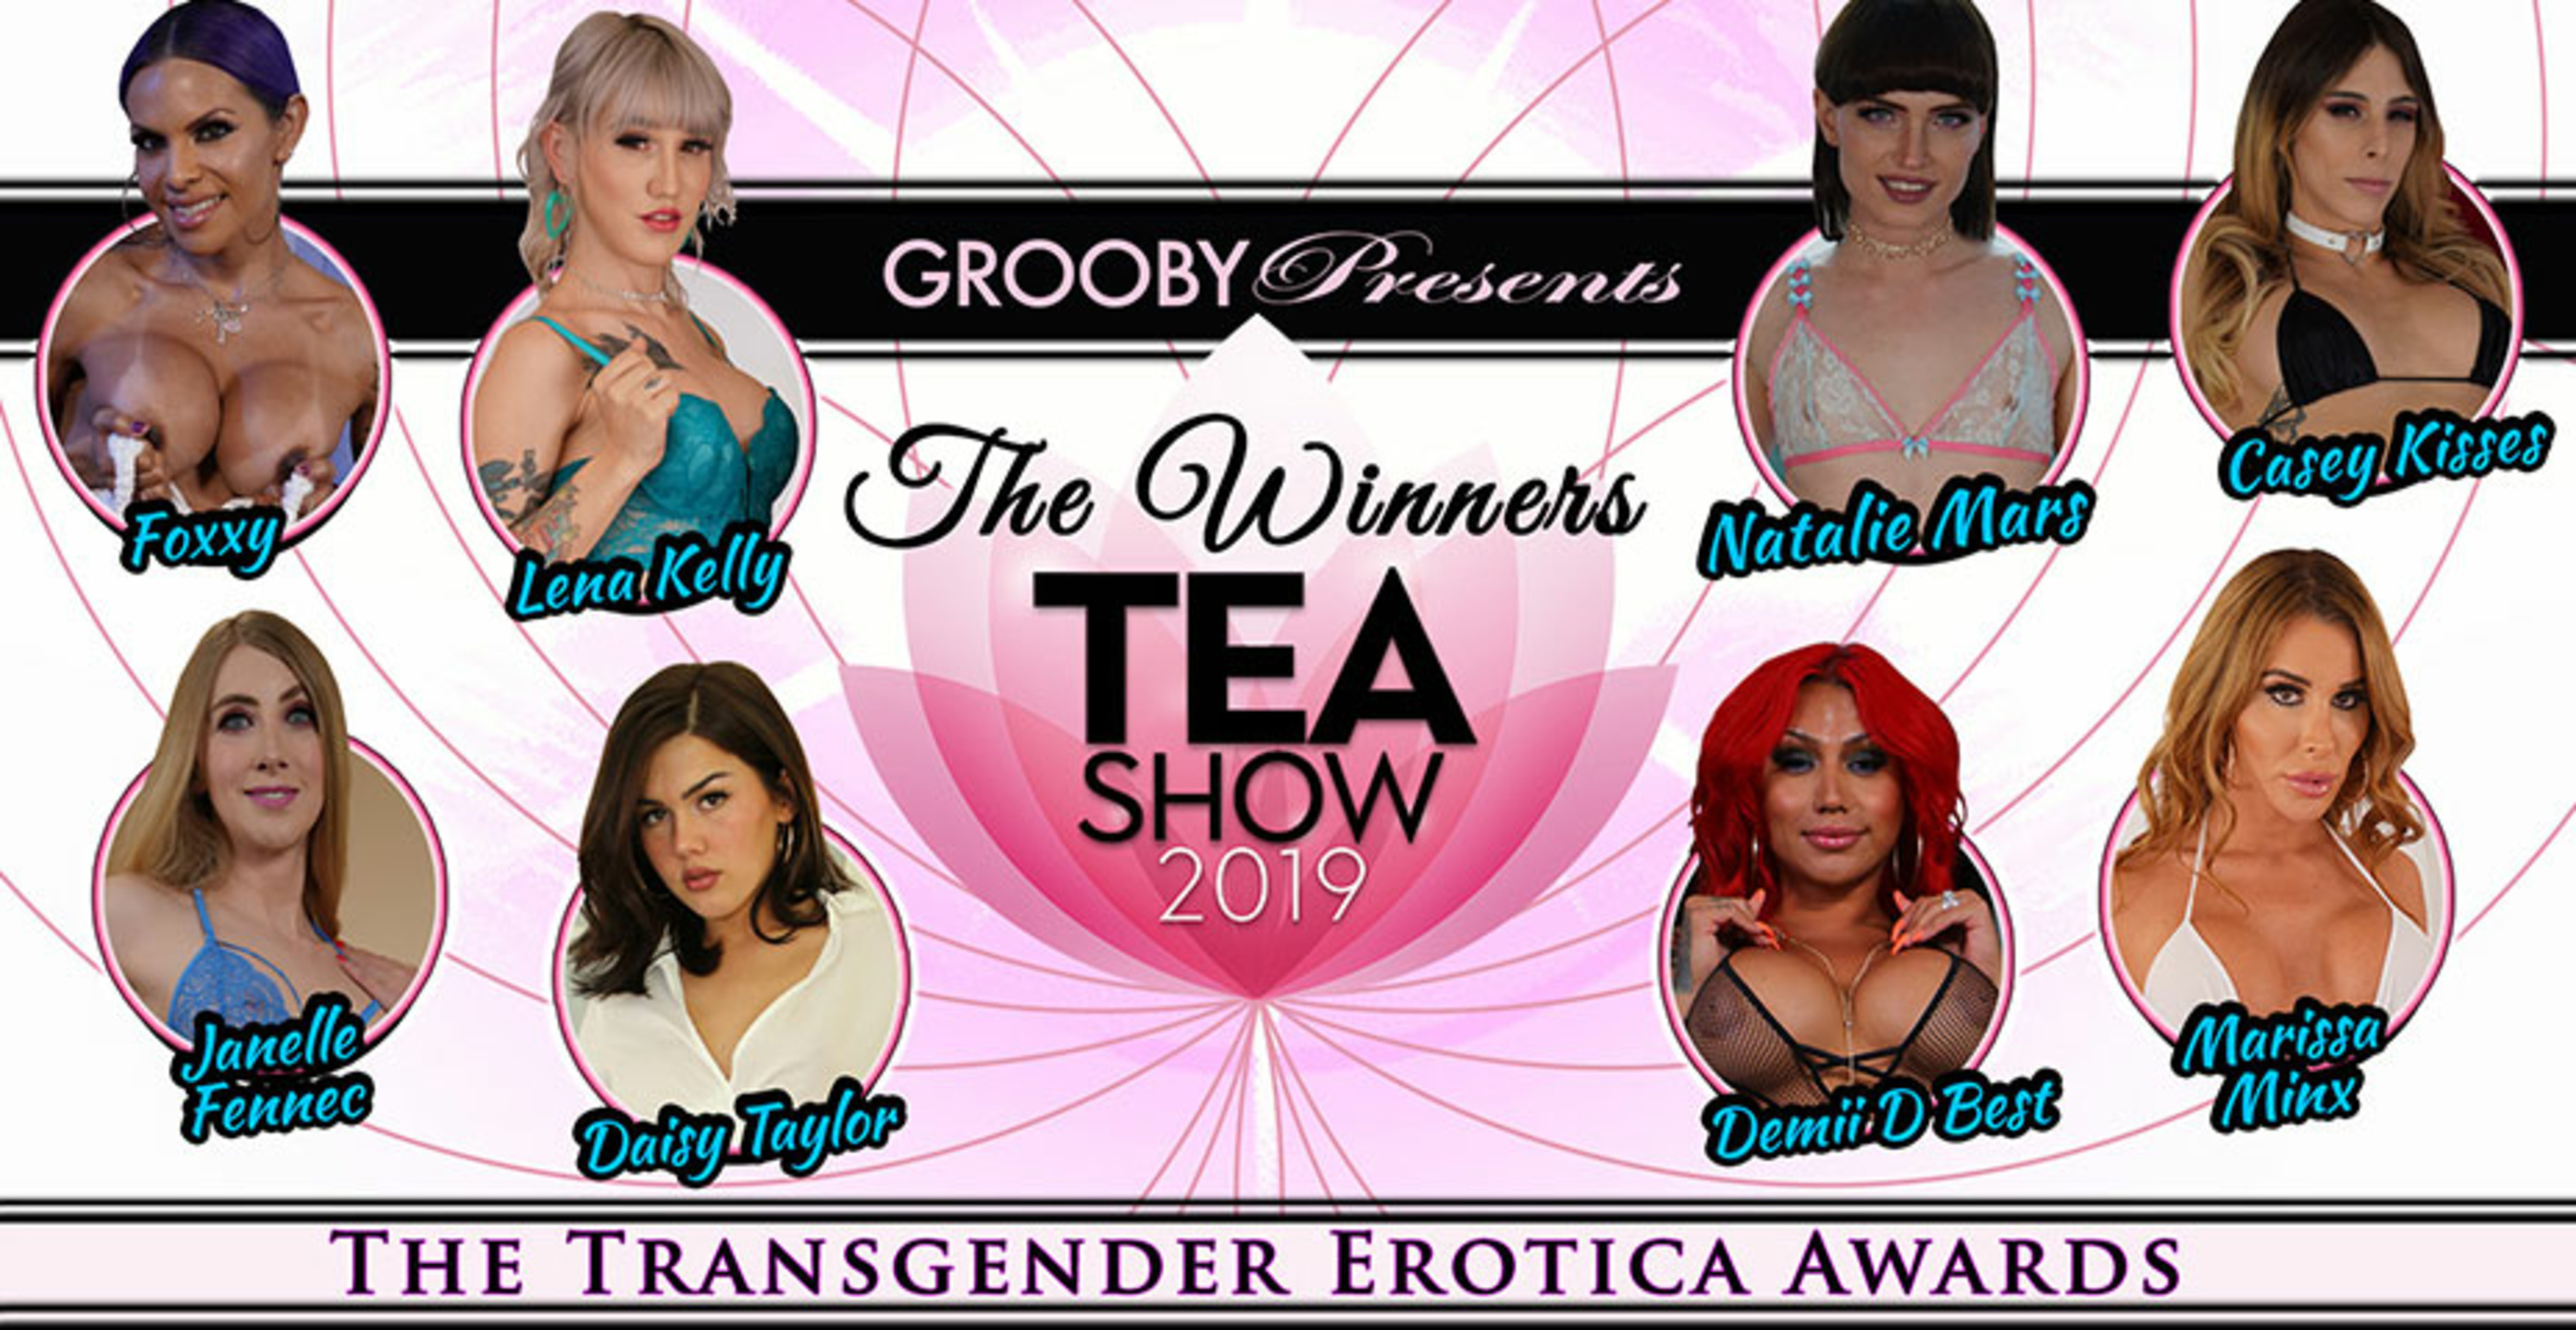 Nude Tranny Awards - GroobyDVD - - A Huge Library of TGirl Porn DVDs!